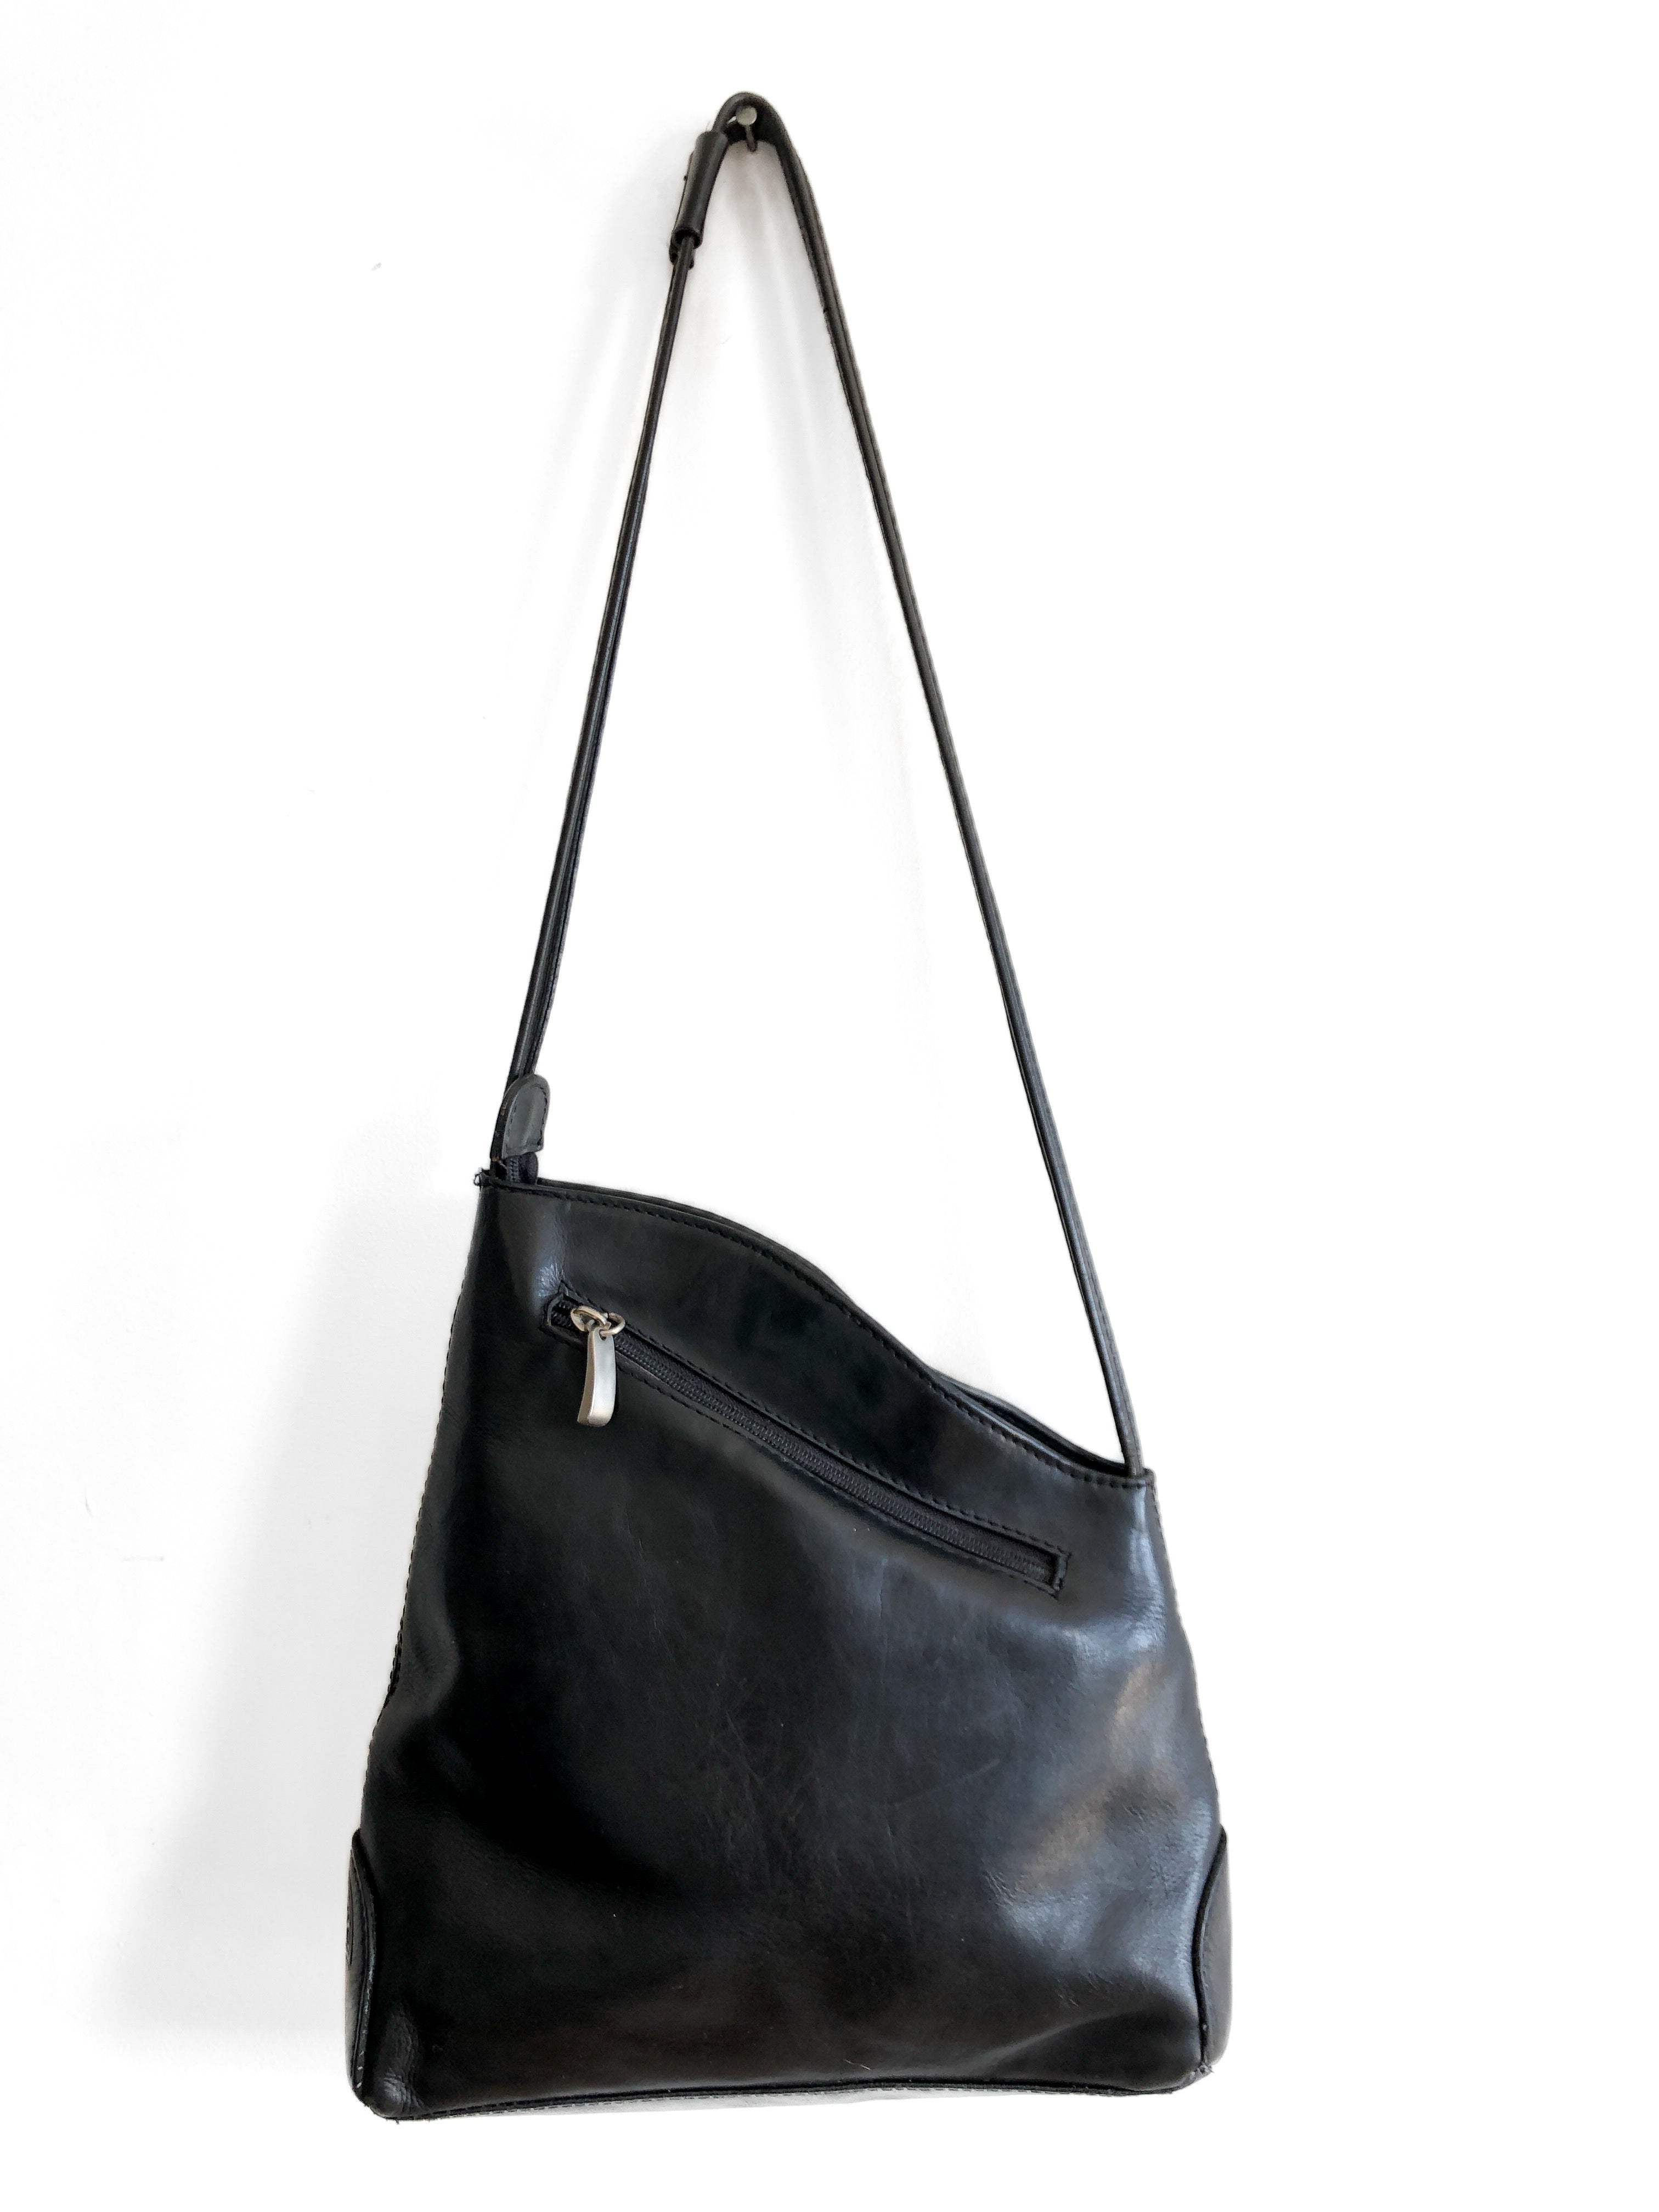 Toledano Italy Black Leather Bag, Assymetric 90s Leather Purse